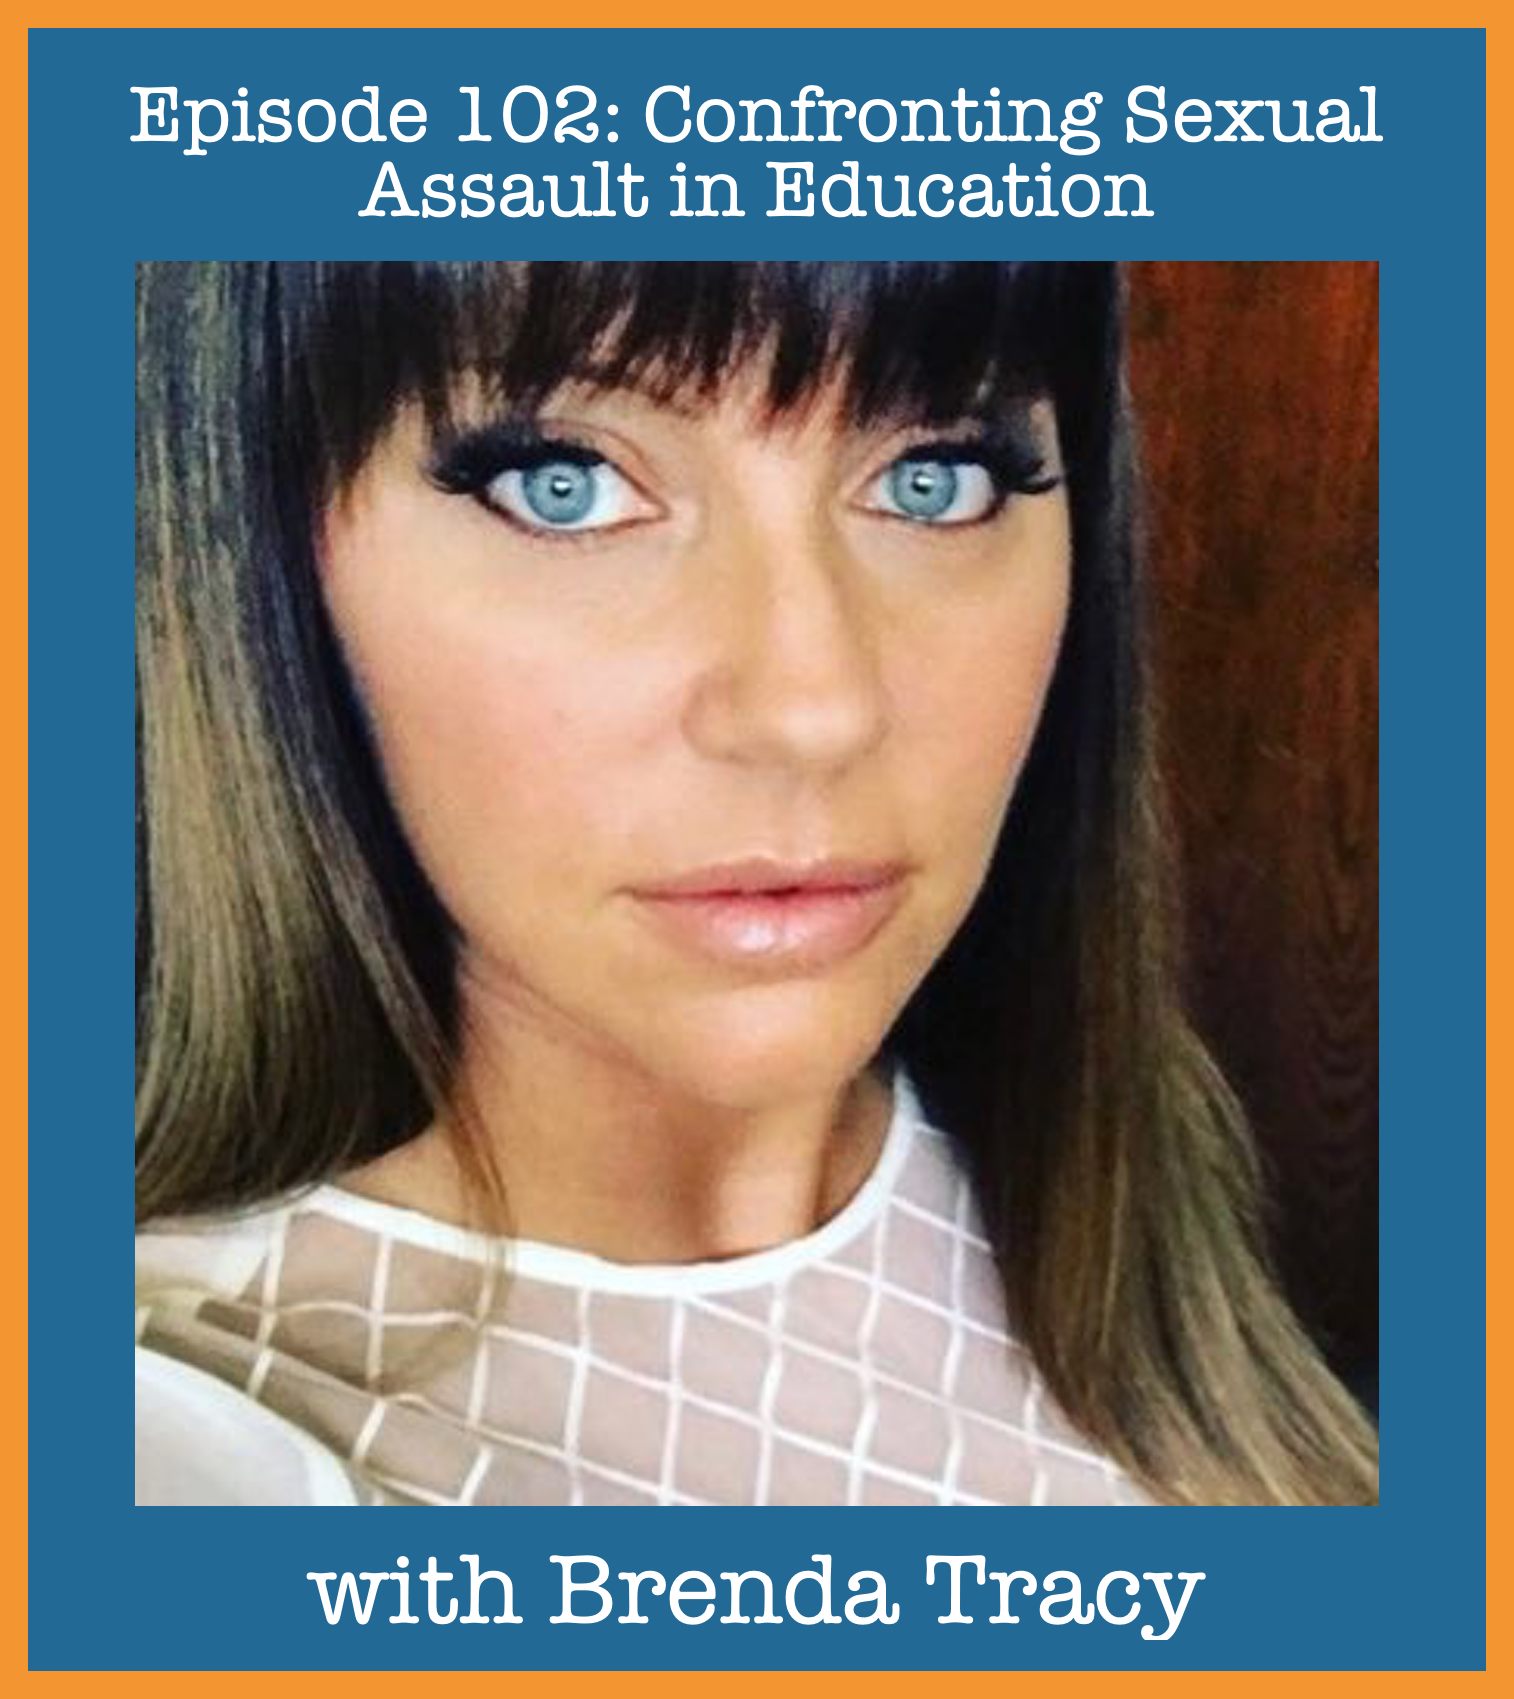 episode-102-confronting-sexual-assault-in-education-with-brenda-tracy.png